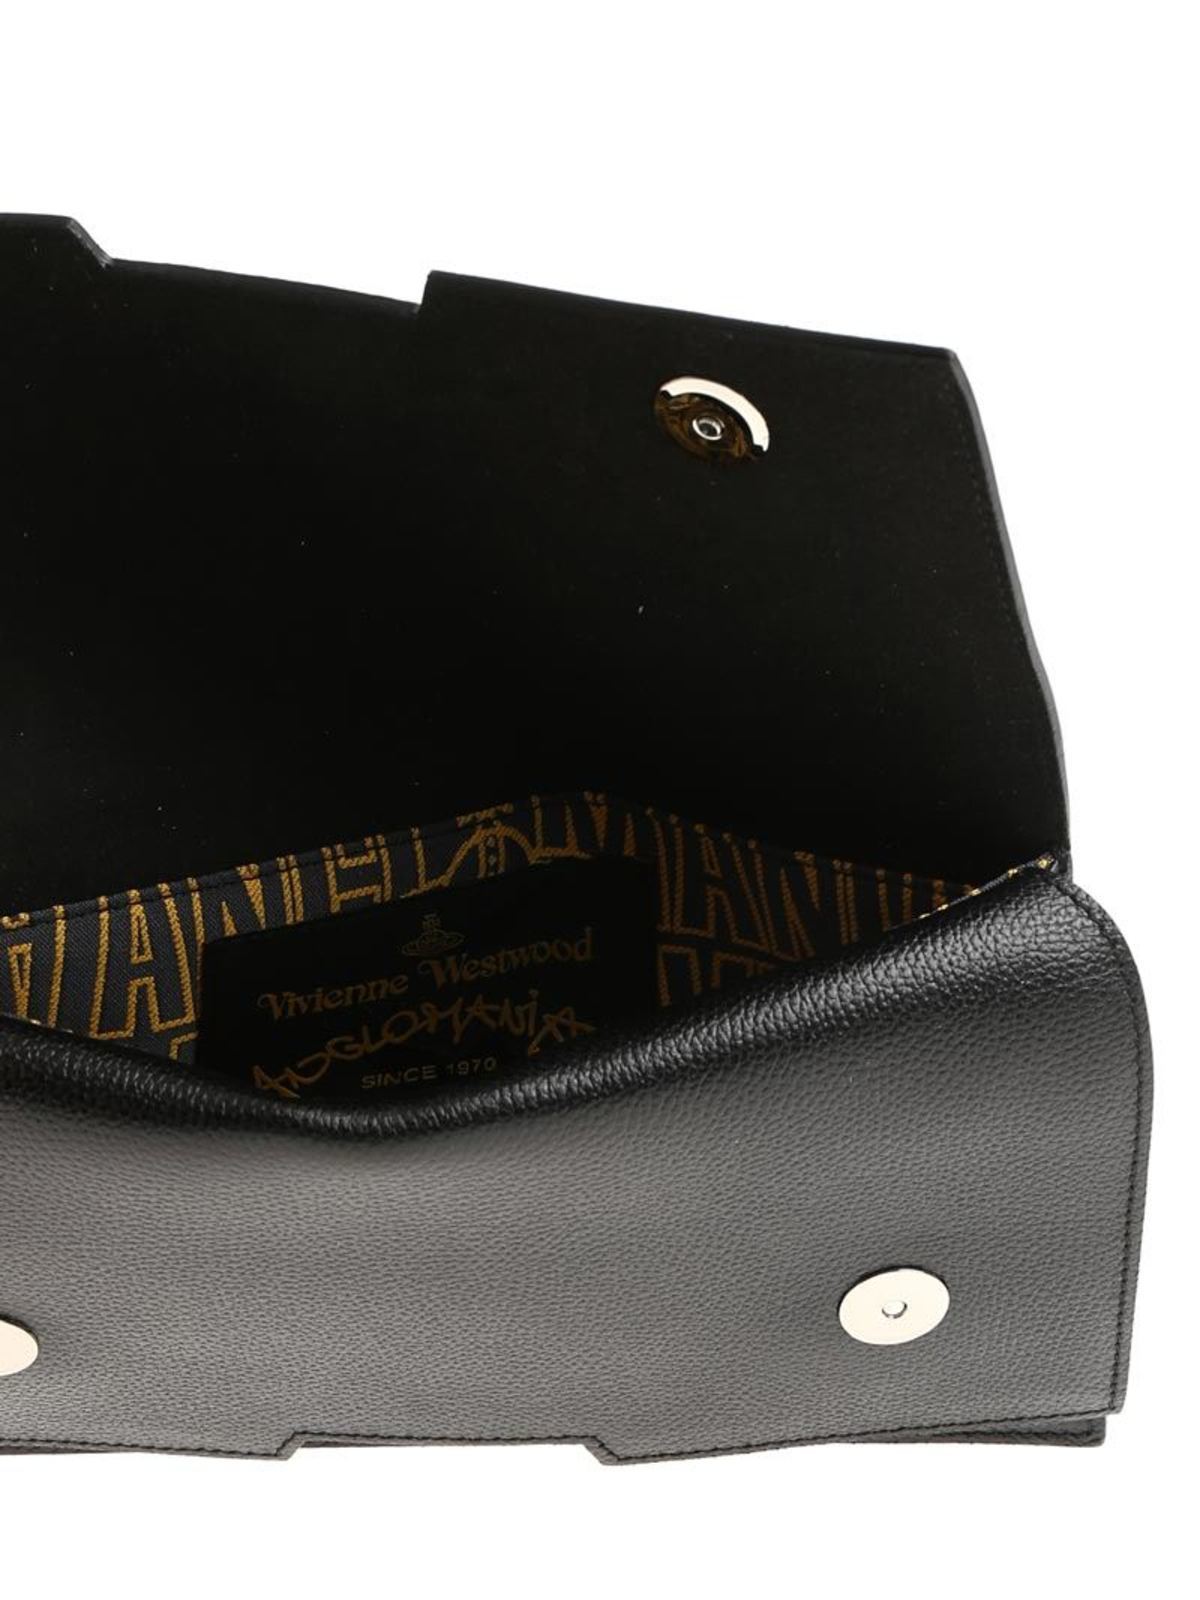 Shop Vivienne Westwood Anglomania Bolso Clutch - Negro